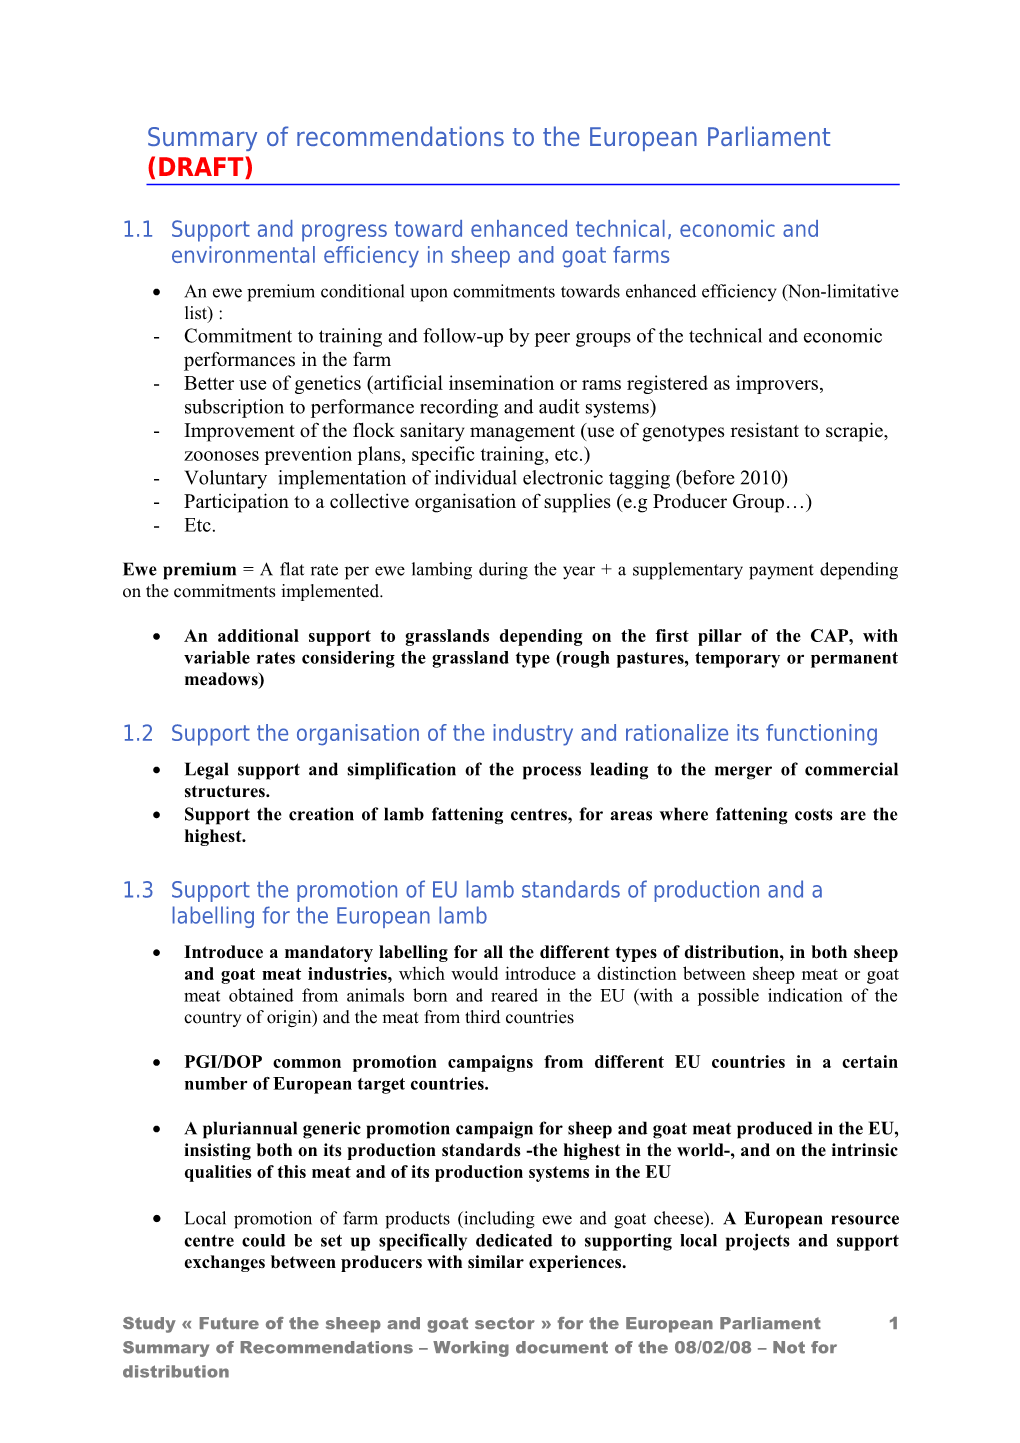 Summary of Recommendations to the European Parliament (DRAFT)